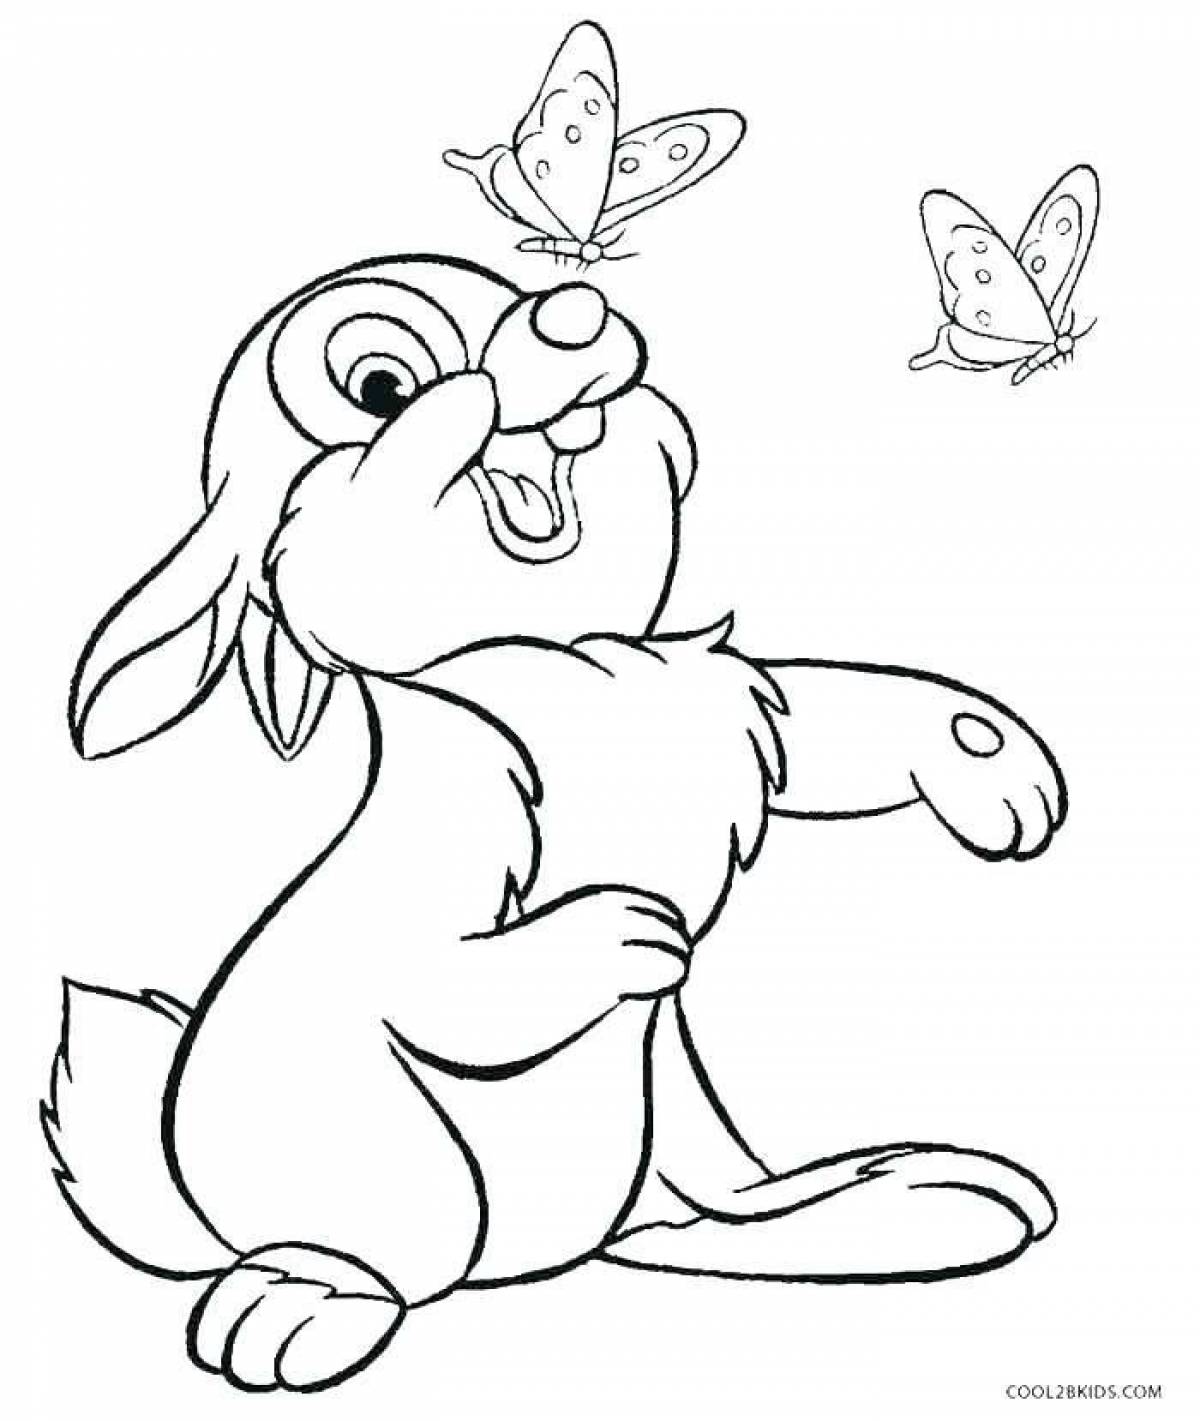 Cozy rabbit coloring book for kids